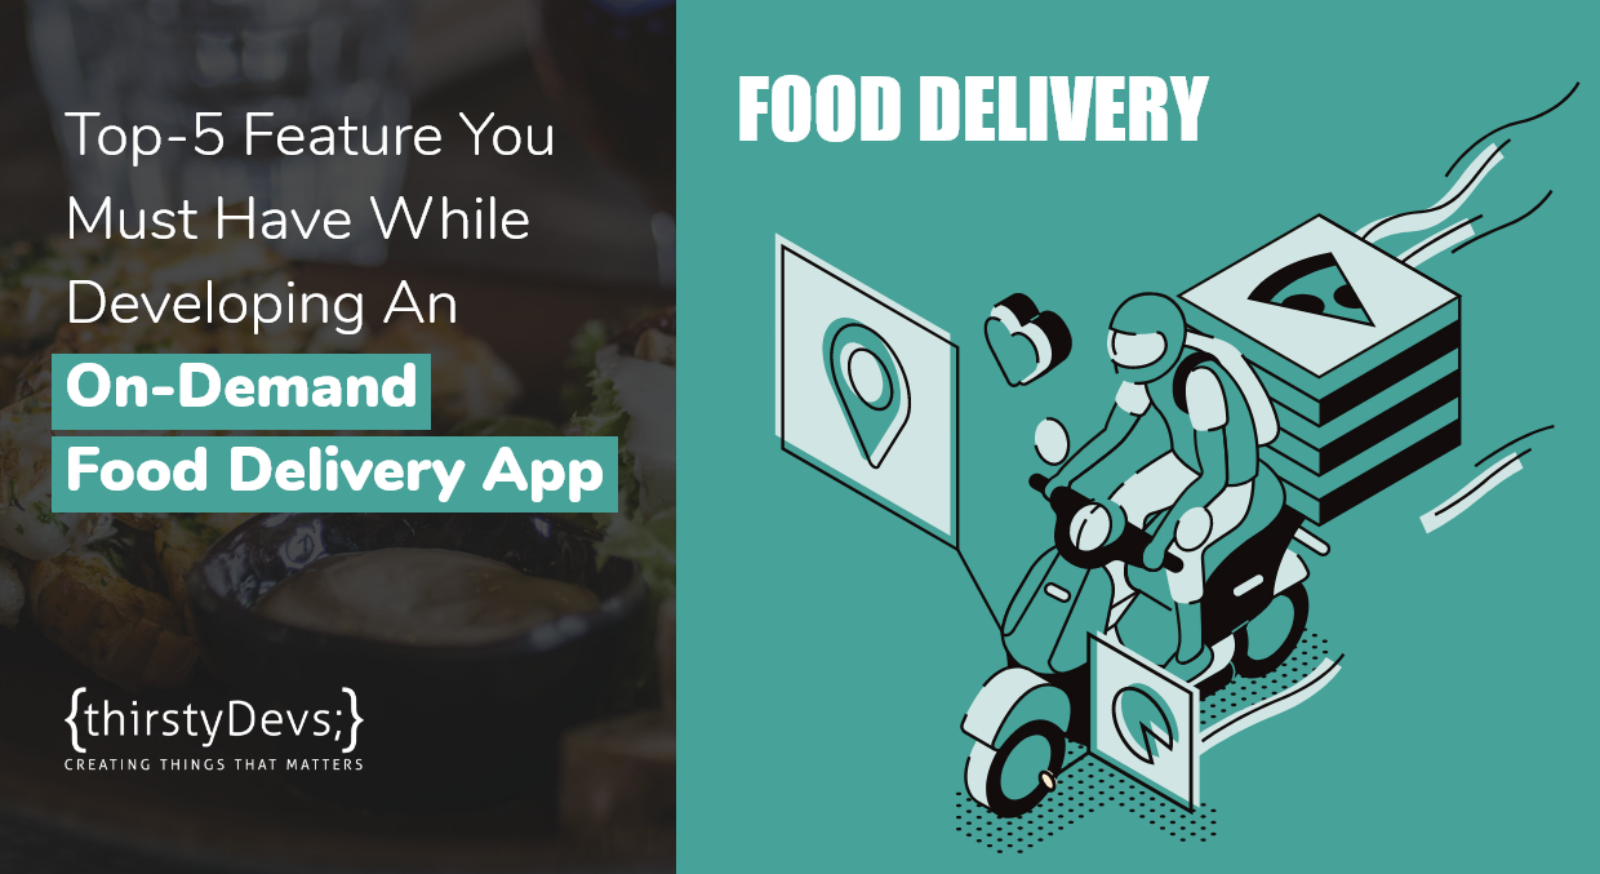 Top-5 Feature You Must Have While Developing An On-Demand Food Delivery App